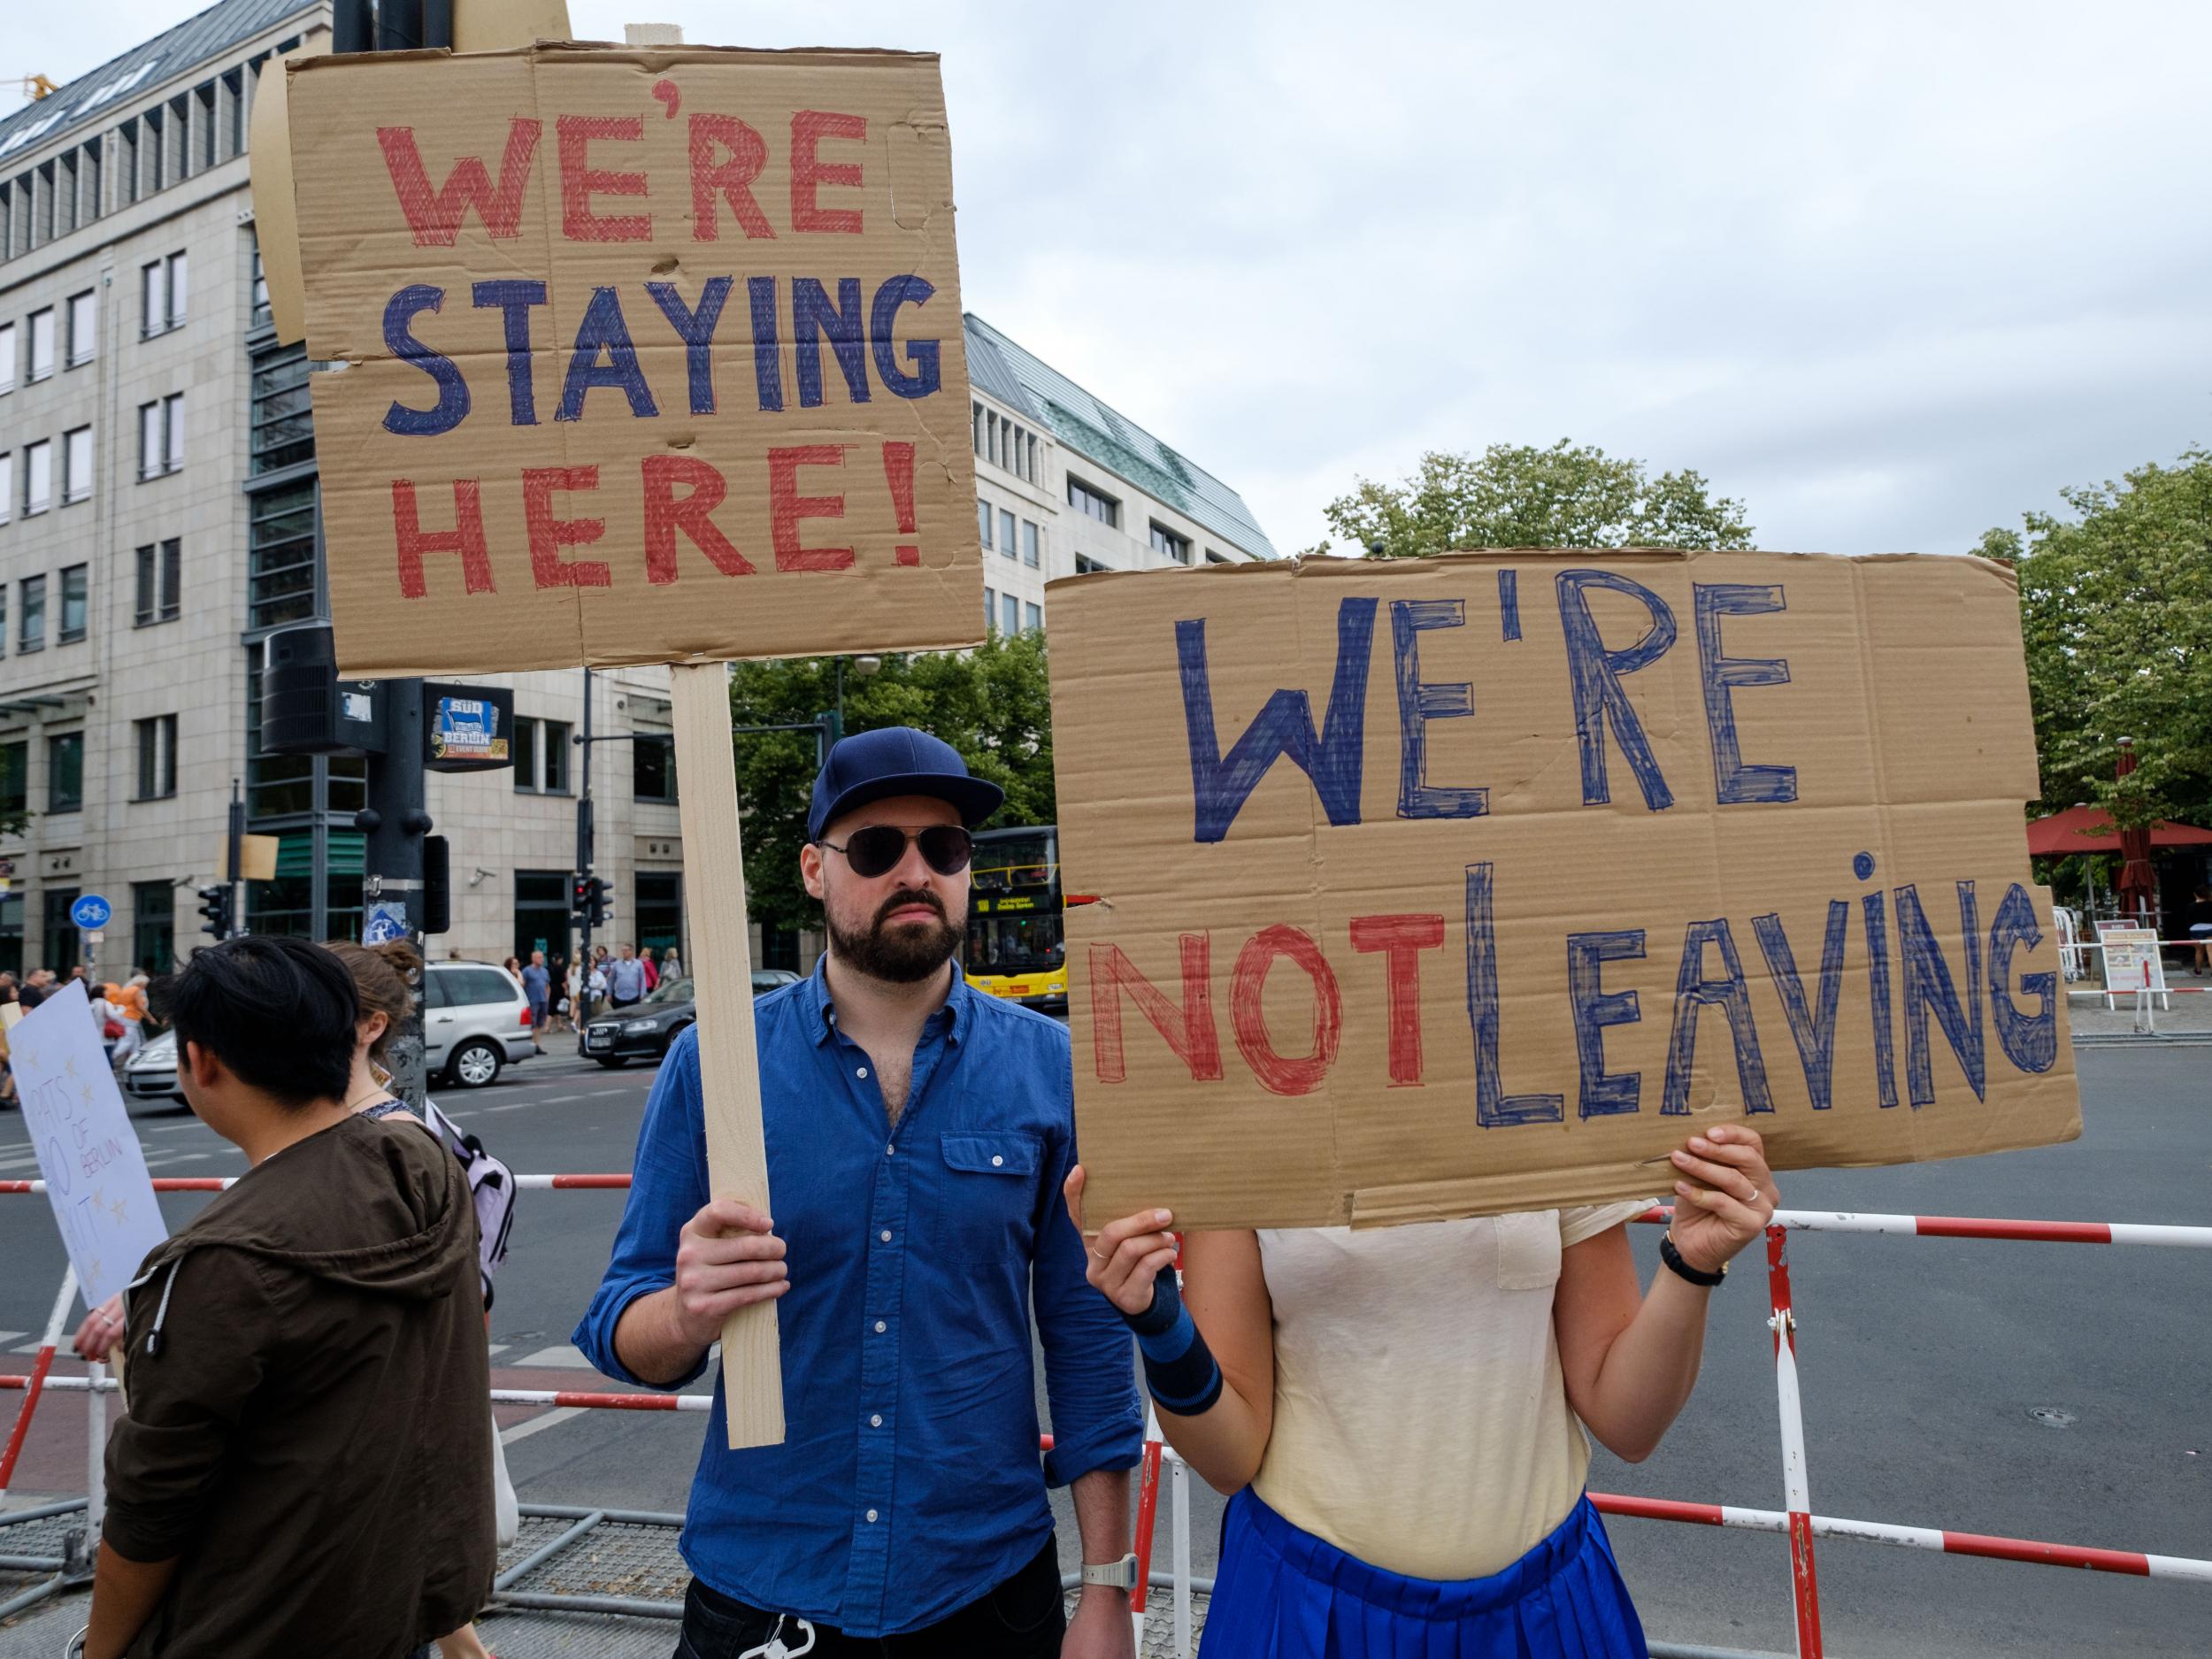 British expats hold up signs to protest Brexit